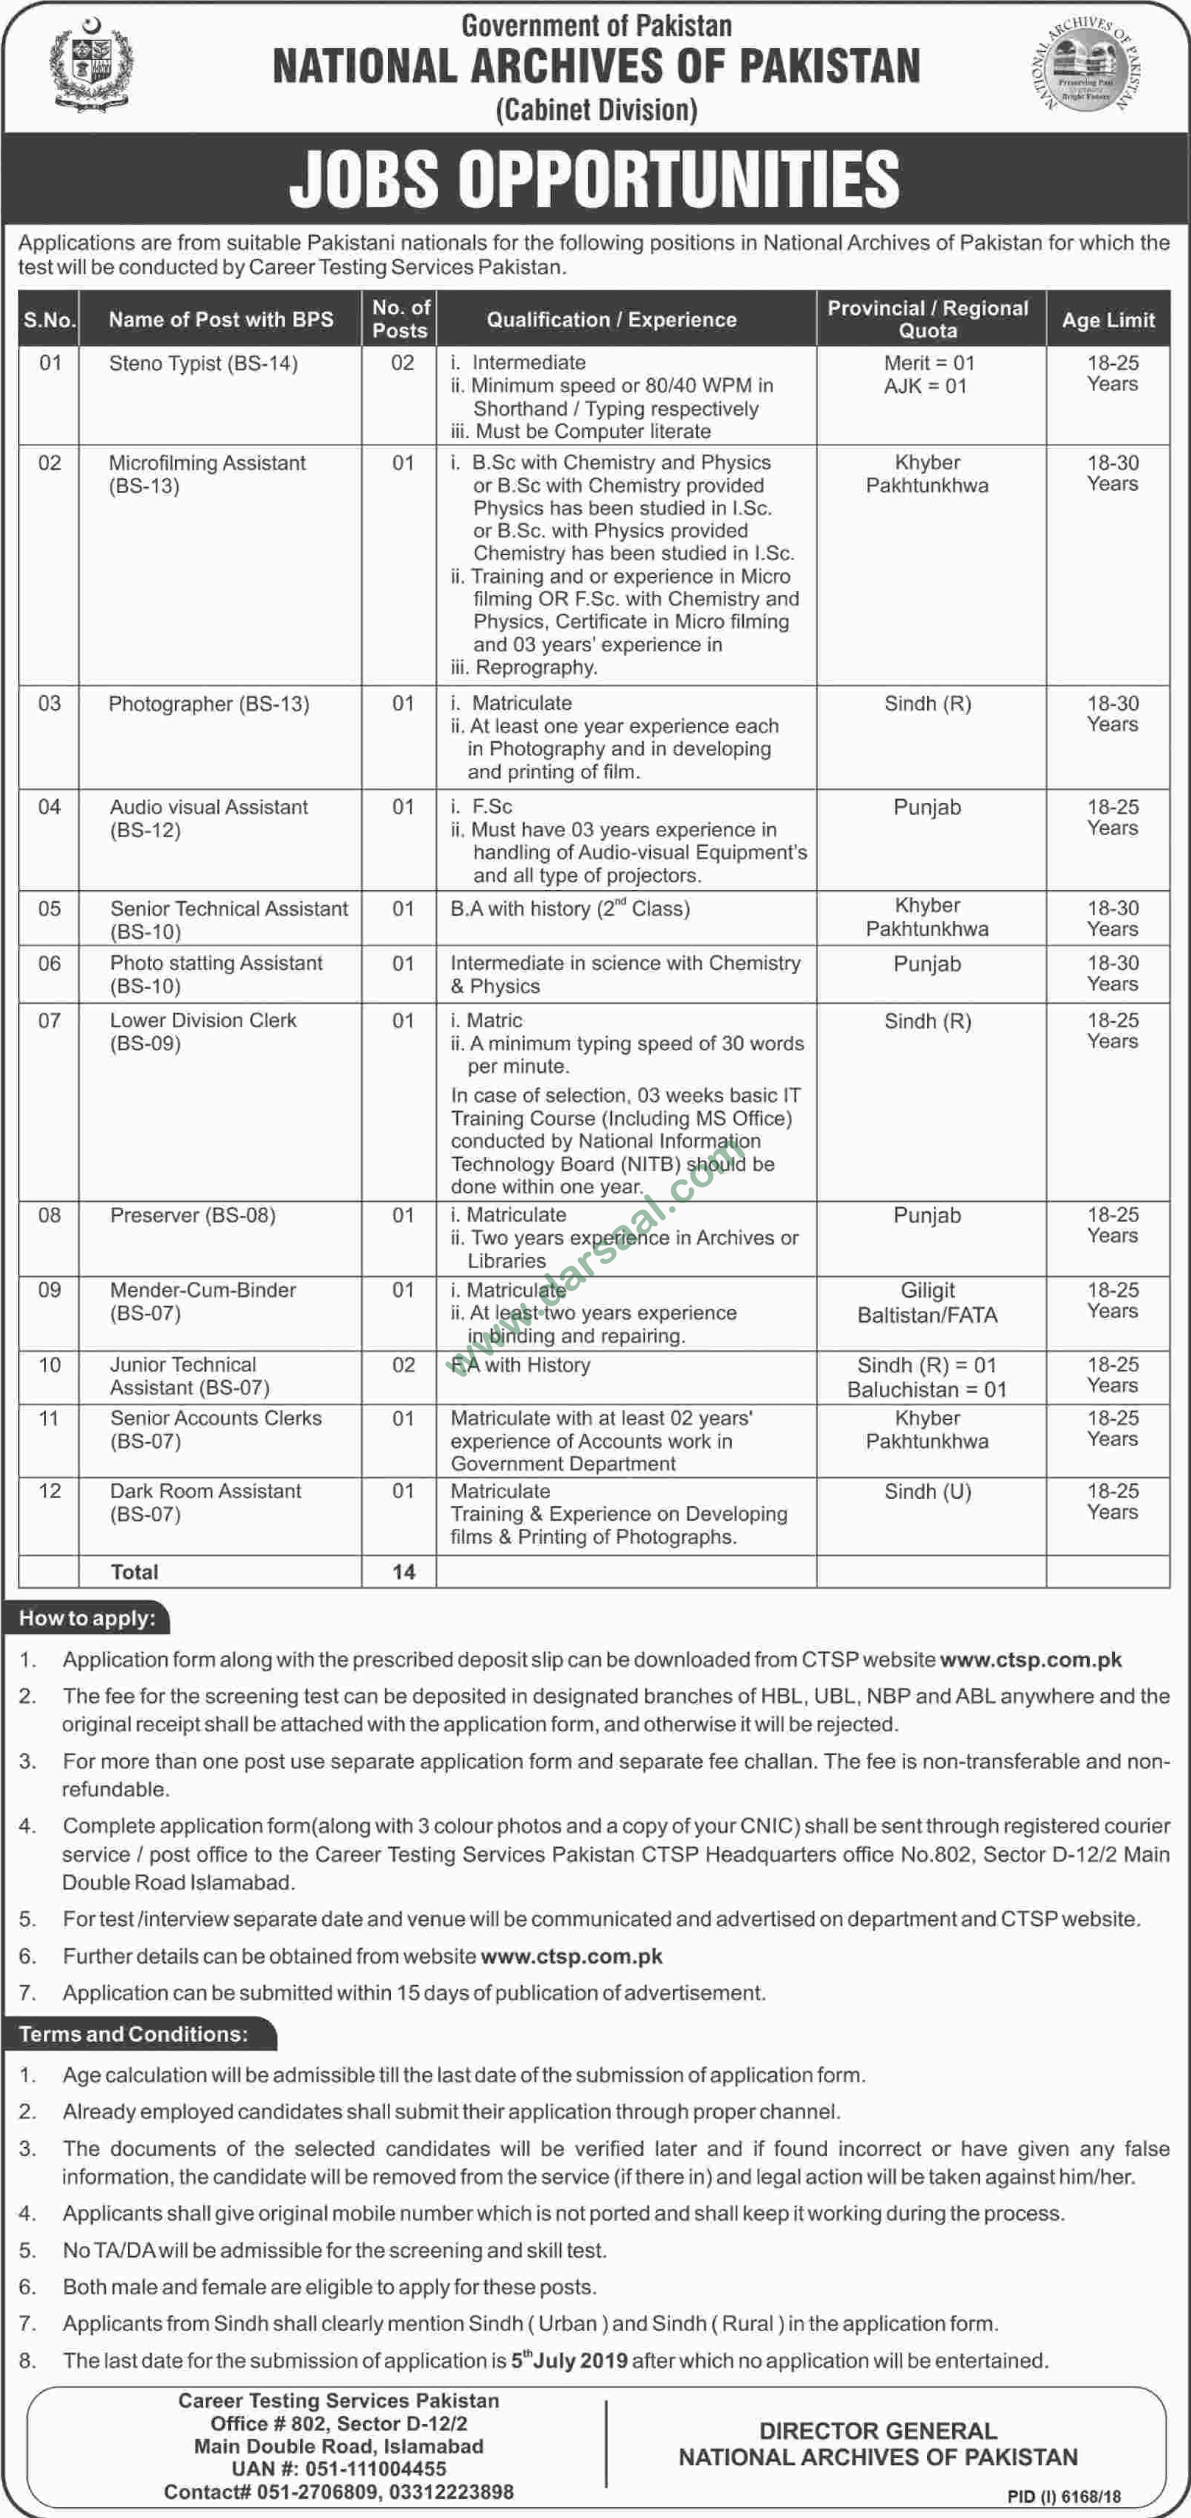 Photostatting Assistant Jobs in National Archives of Pakistan in Islamabad - Jun 23, 2019